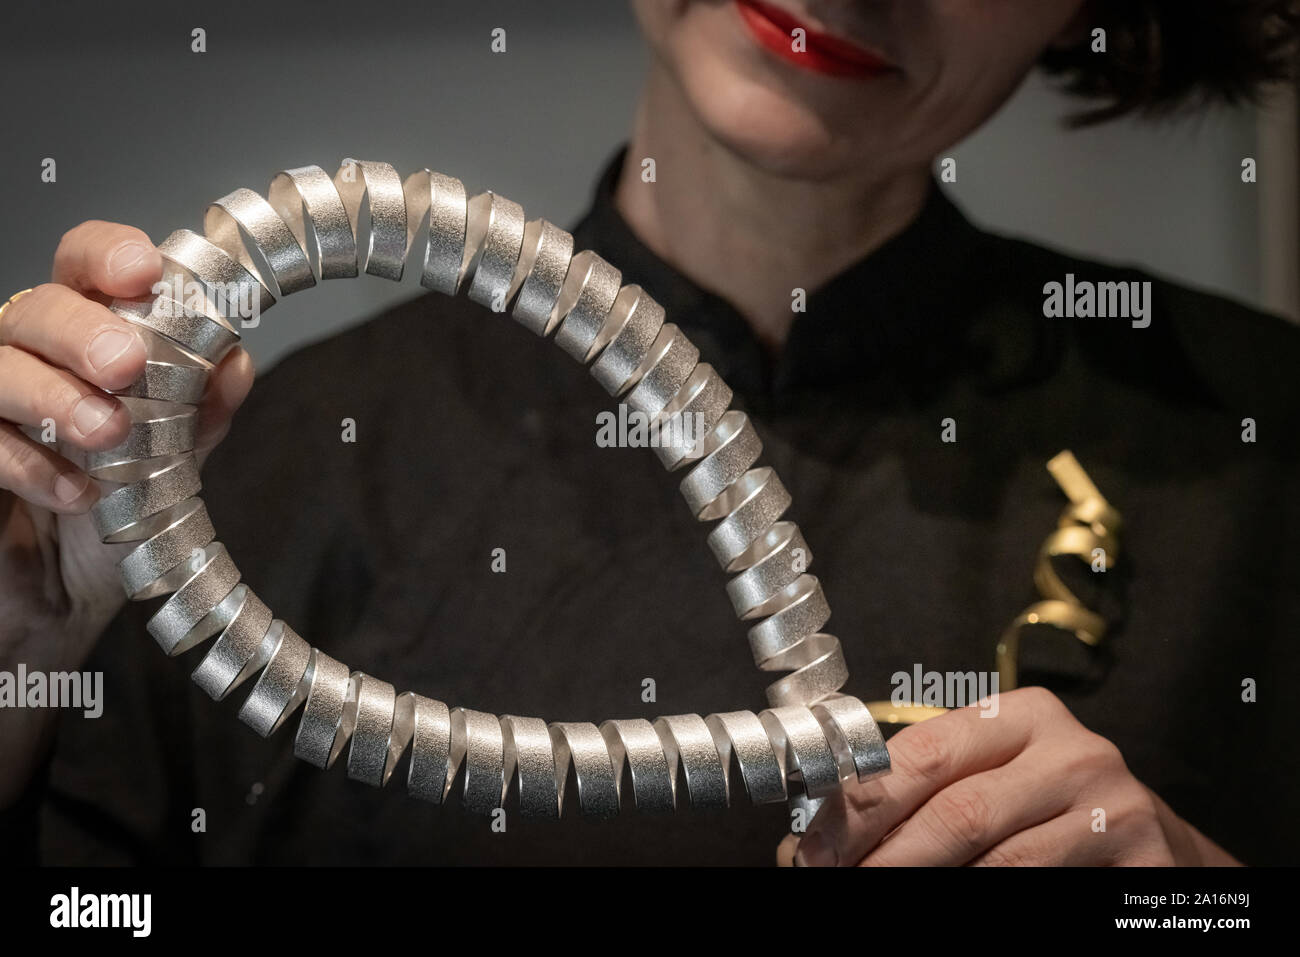 London, UK. 24th Sept, 2019. Spiral Neck Sculpture by Ute Decker on display at Goldsmiths' Fair. Held annually at Goldsmiths' Hall, the fair is the UK's best selling event for designer-led contemporary jewellery and silverware. Credit: Guy Corbishley/Alamy Live News Stock Photo